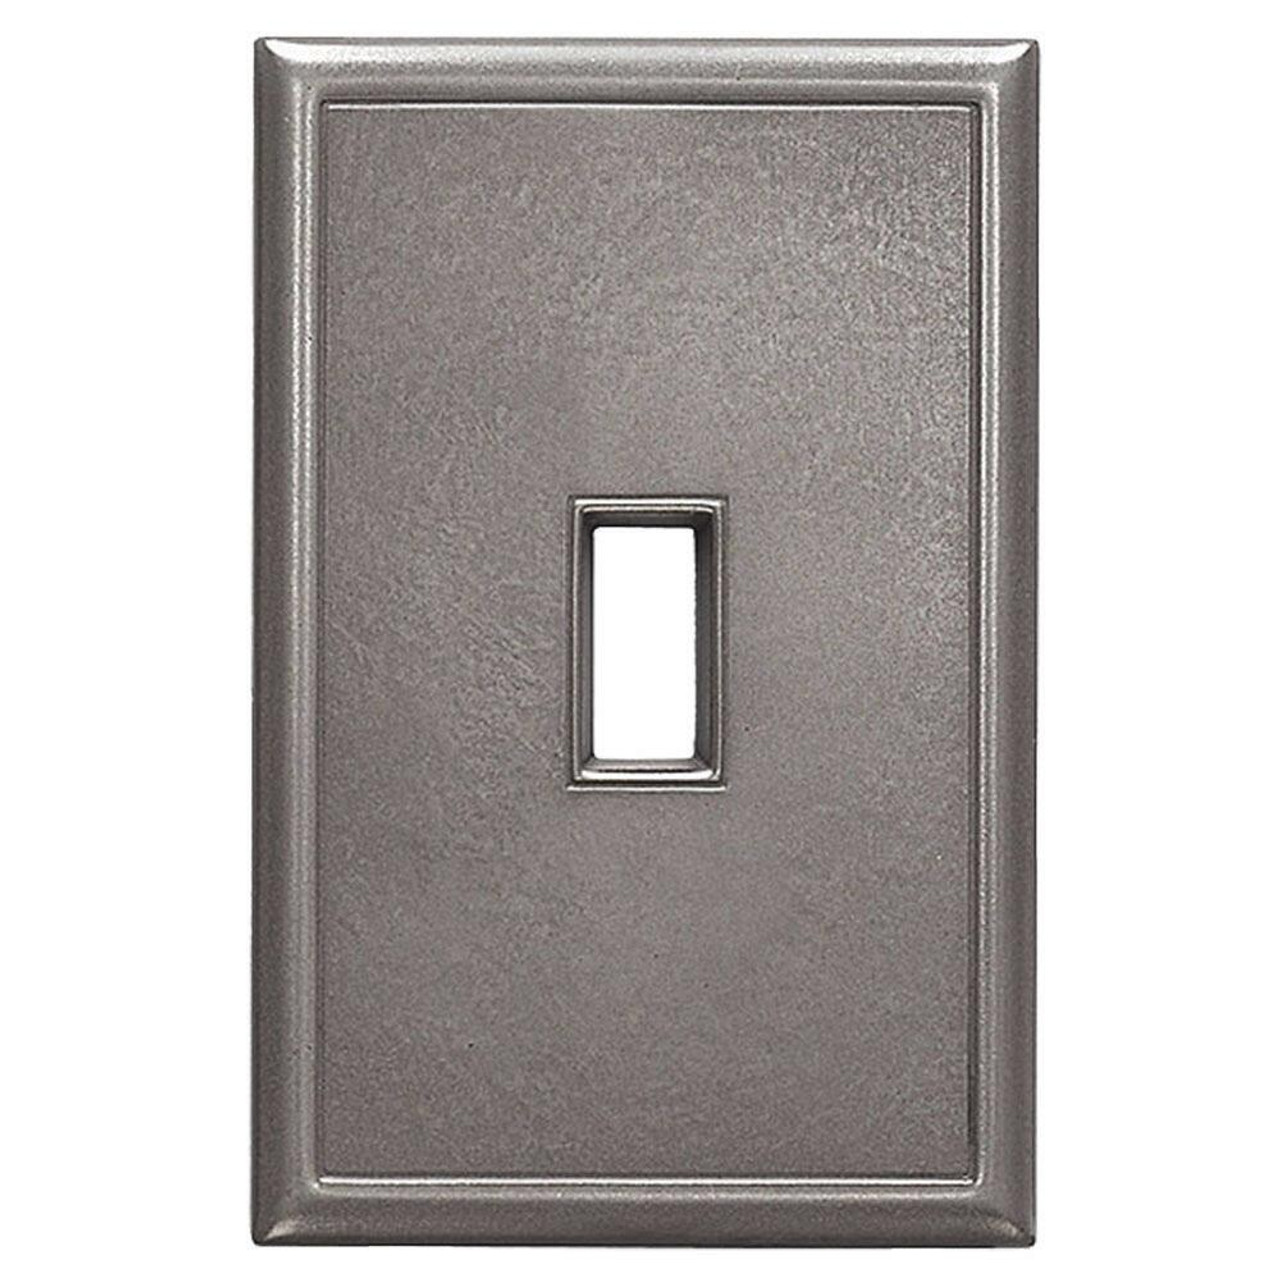 SWP402-24M Questech Cast Metal Brushed Nickel Single Toggle Wall Plate